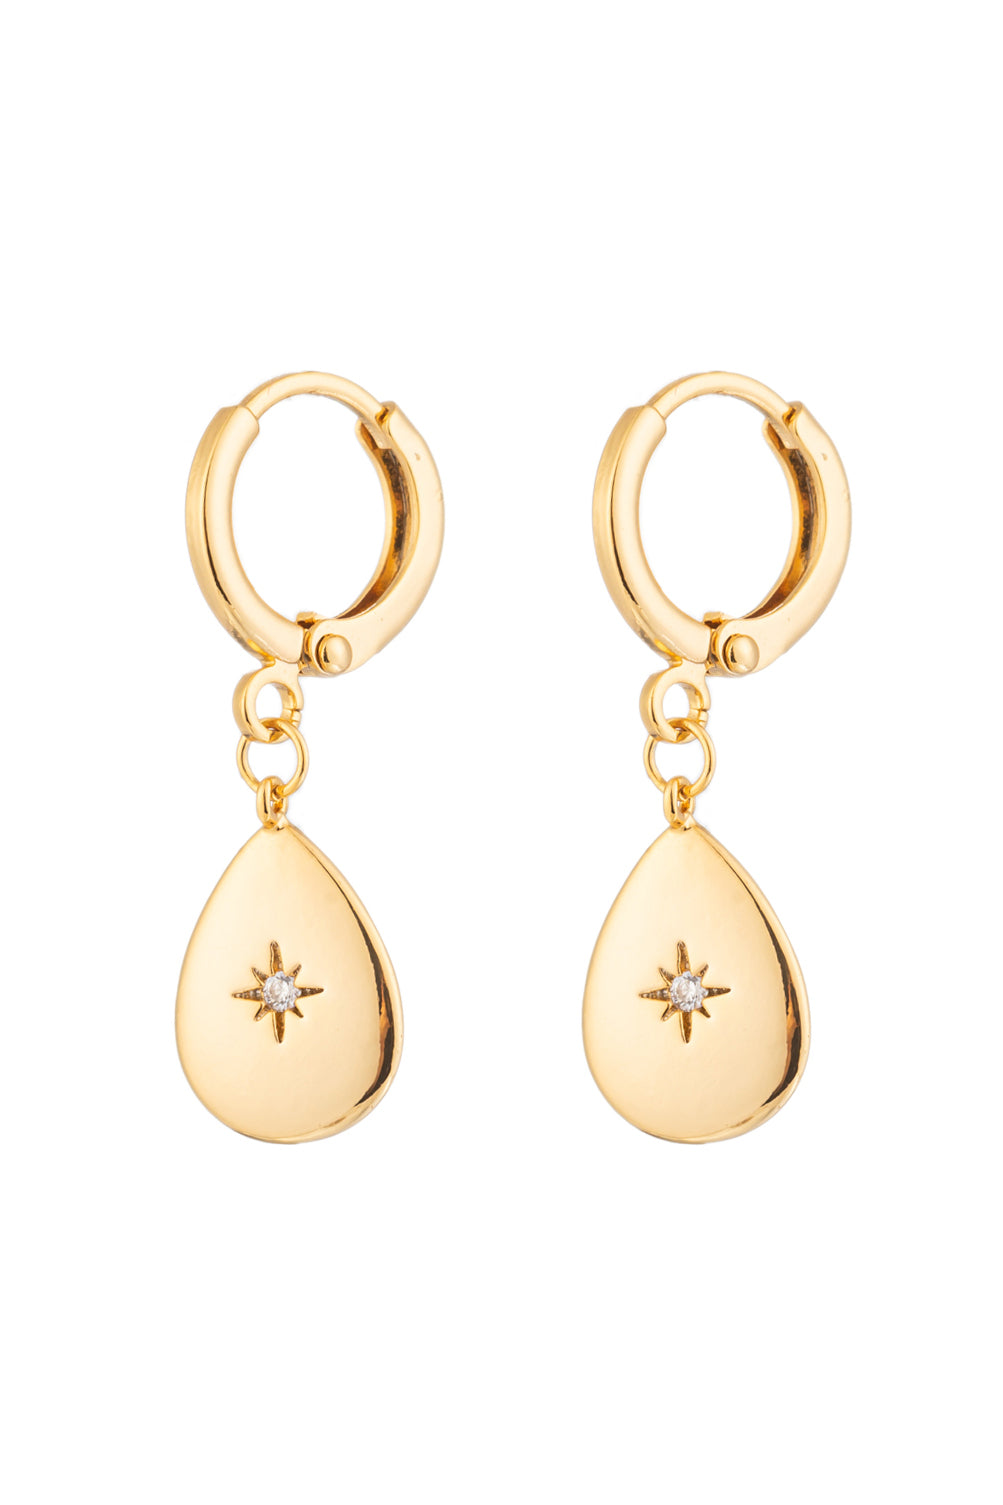 24k gold plated brass earrings studded with a CZ crystal.